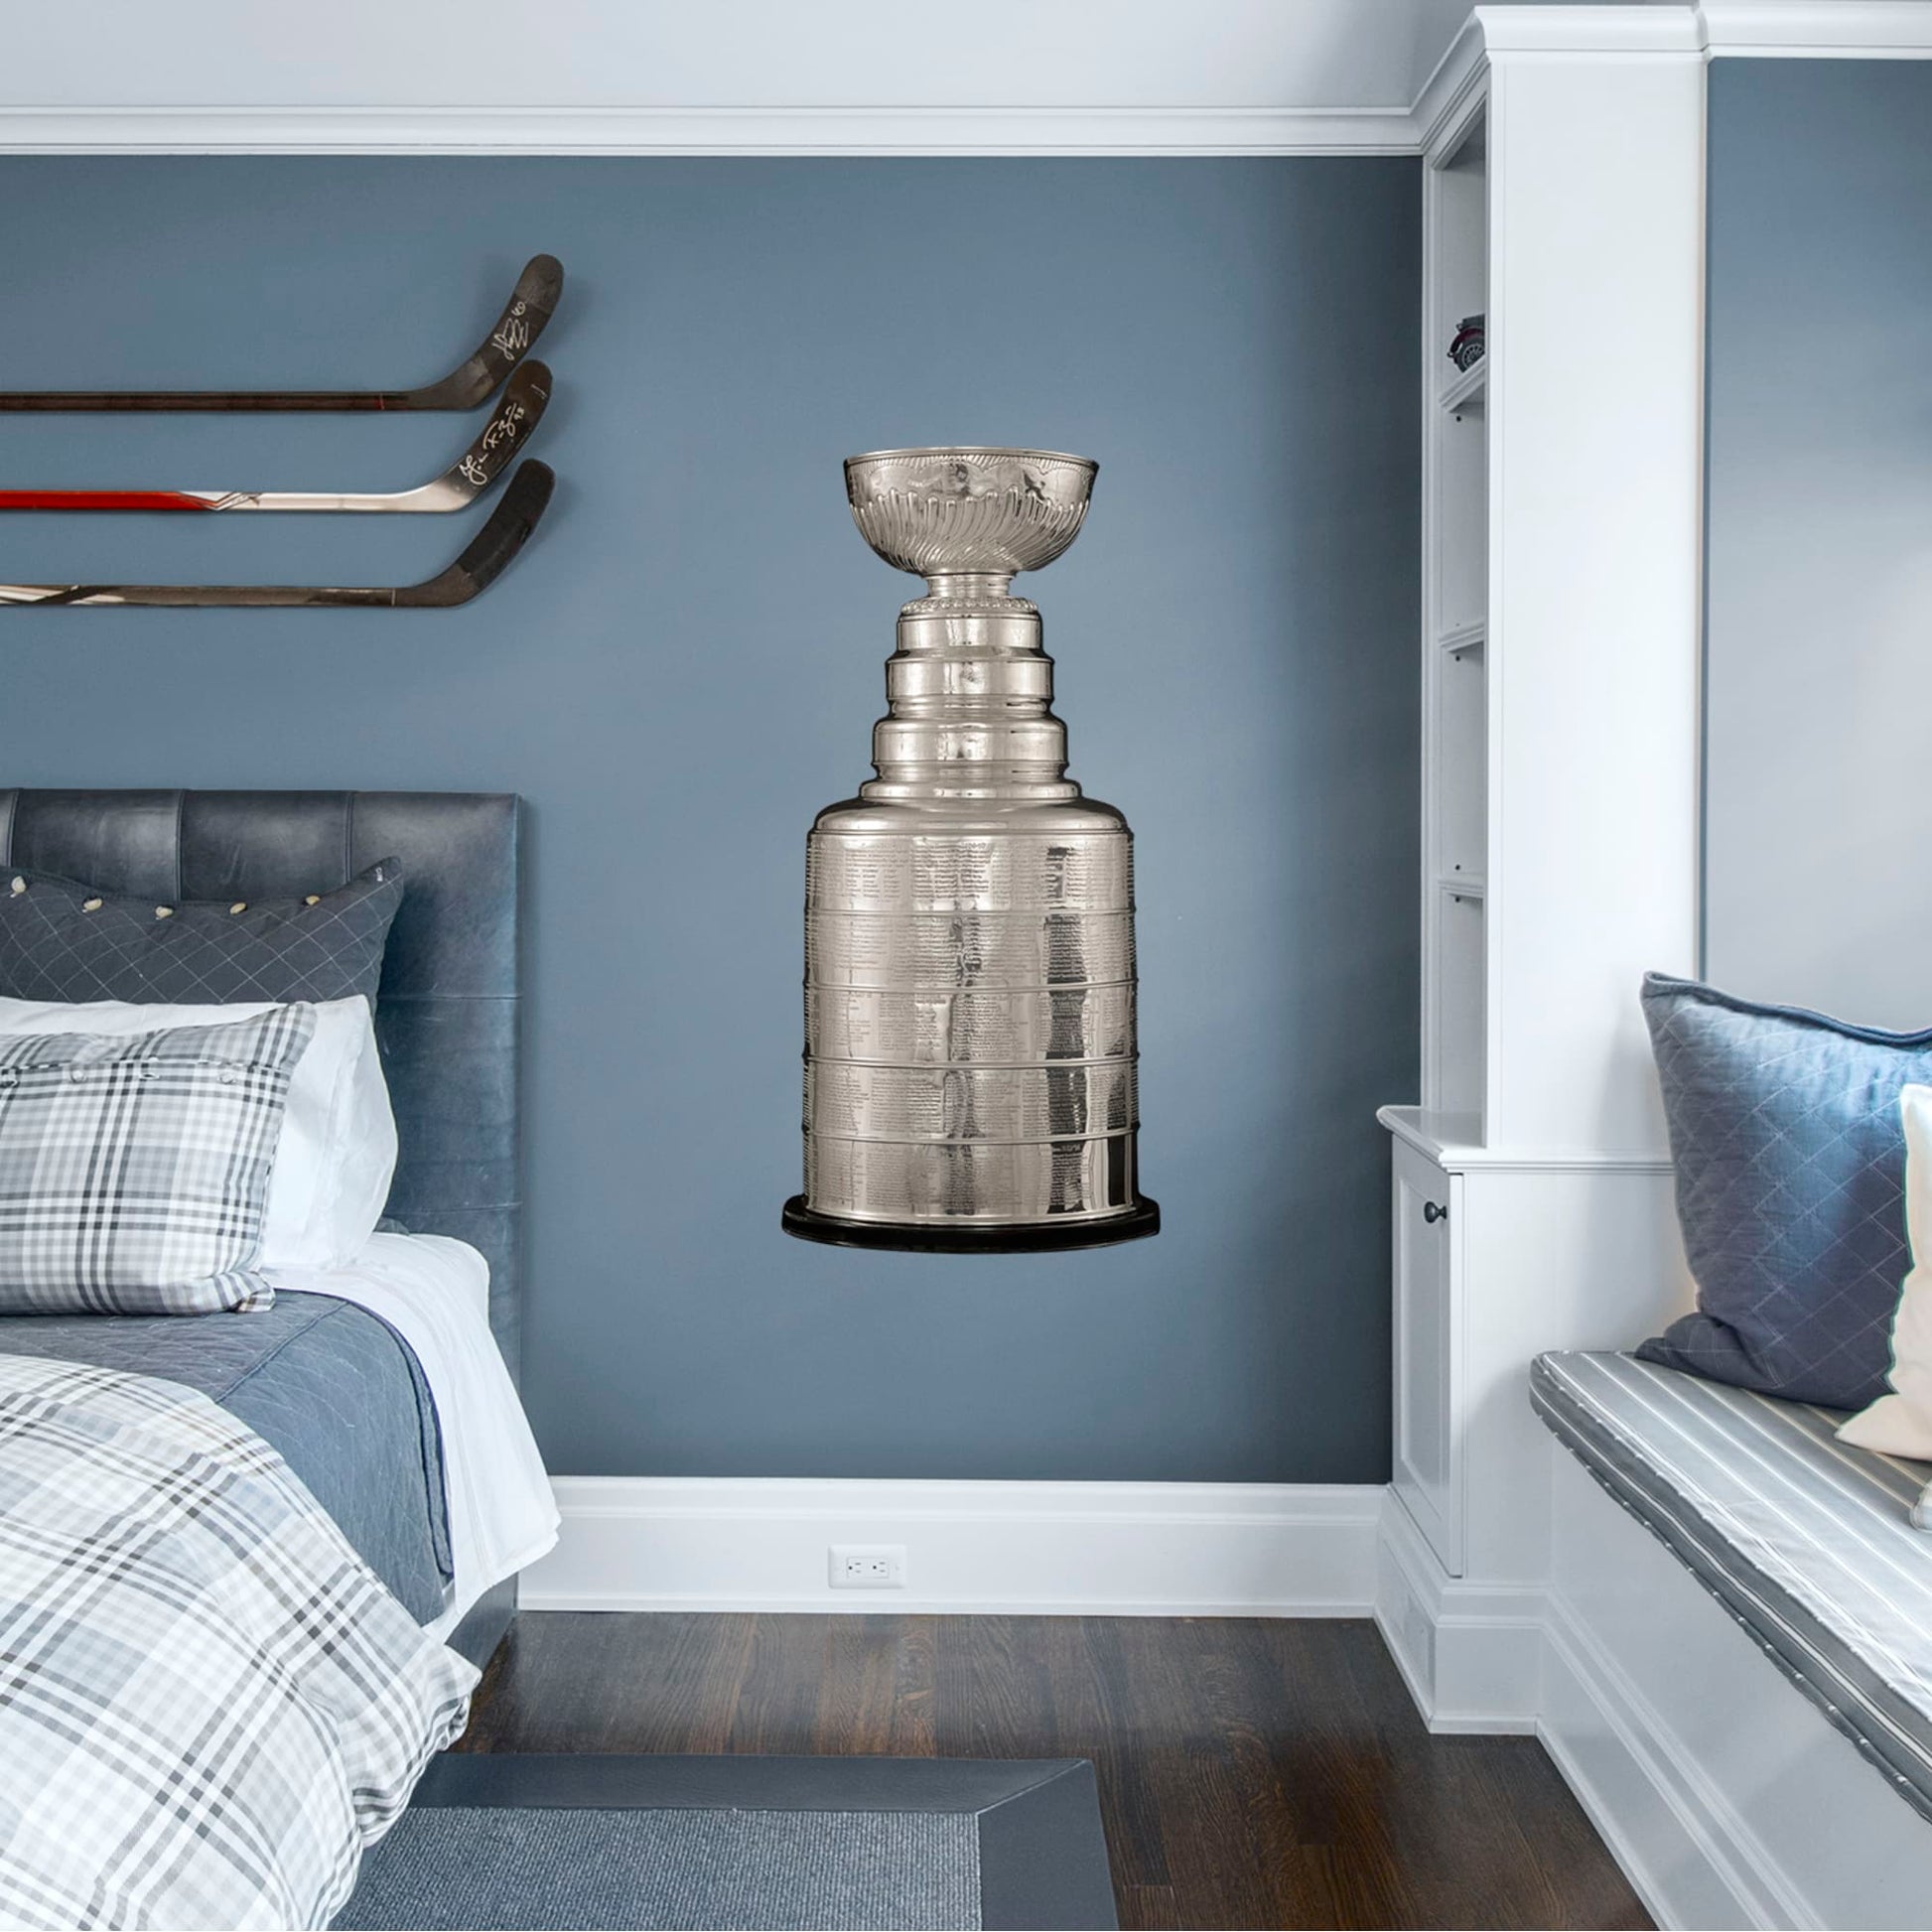 Let's place a new decal on my Stanley cup! More tips below